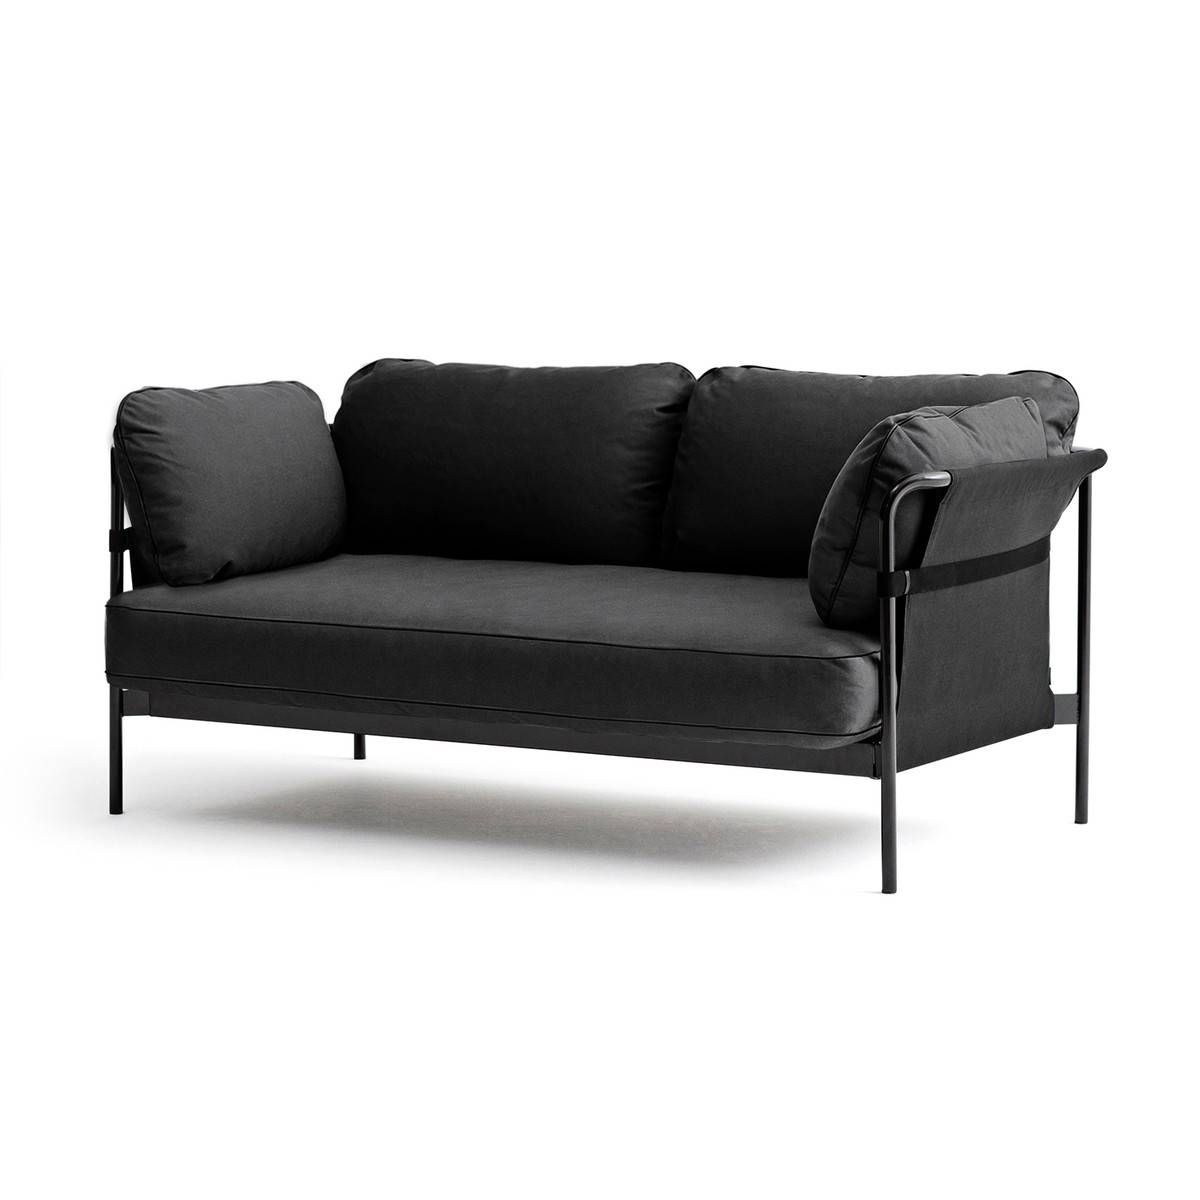 Can 2 Seater Sofahay In Our Interior Design Shop With Regard To Black 2 Seater Sofas (Photo 28 of 30)